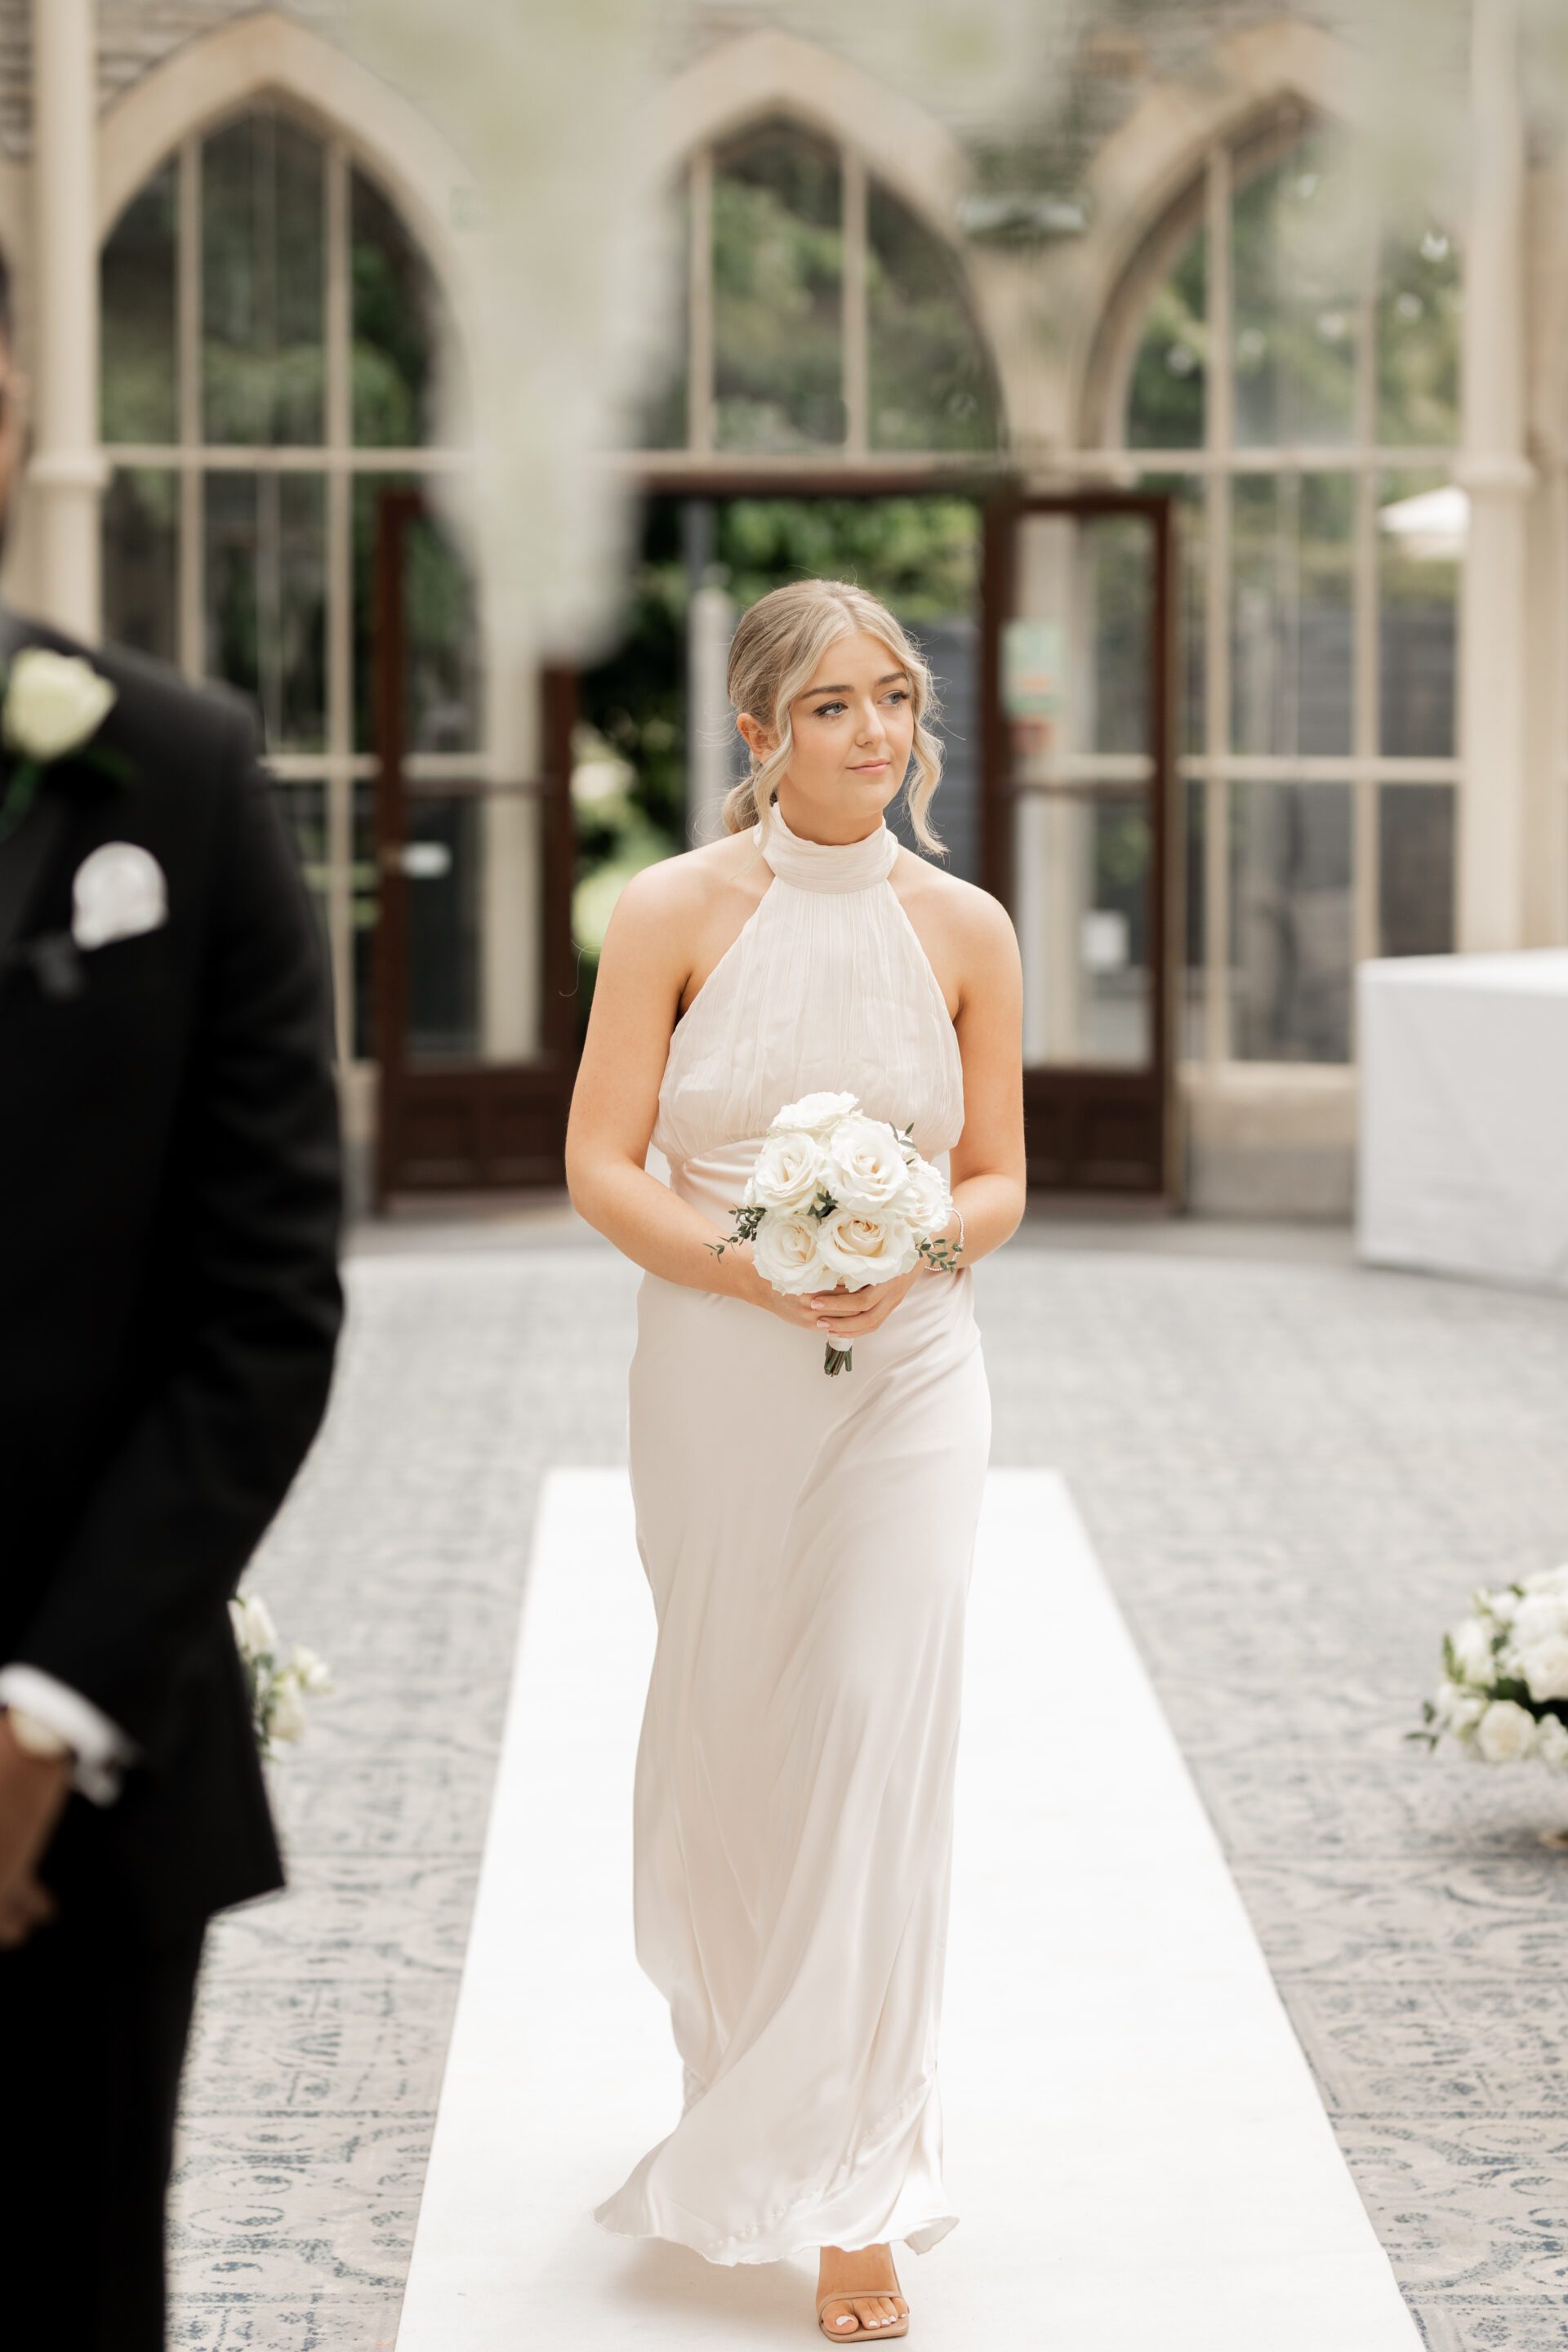 A bridesmaid walks down the aisle for the wedding ceremony in the Orangery at Tortworth Court